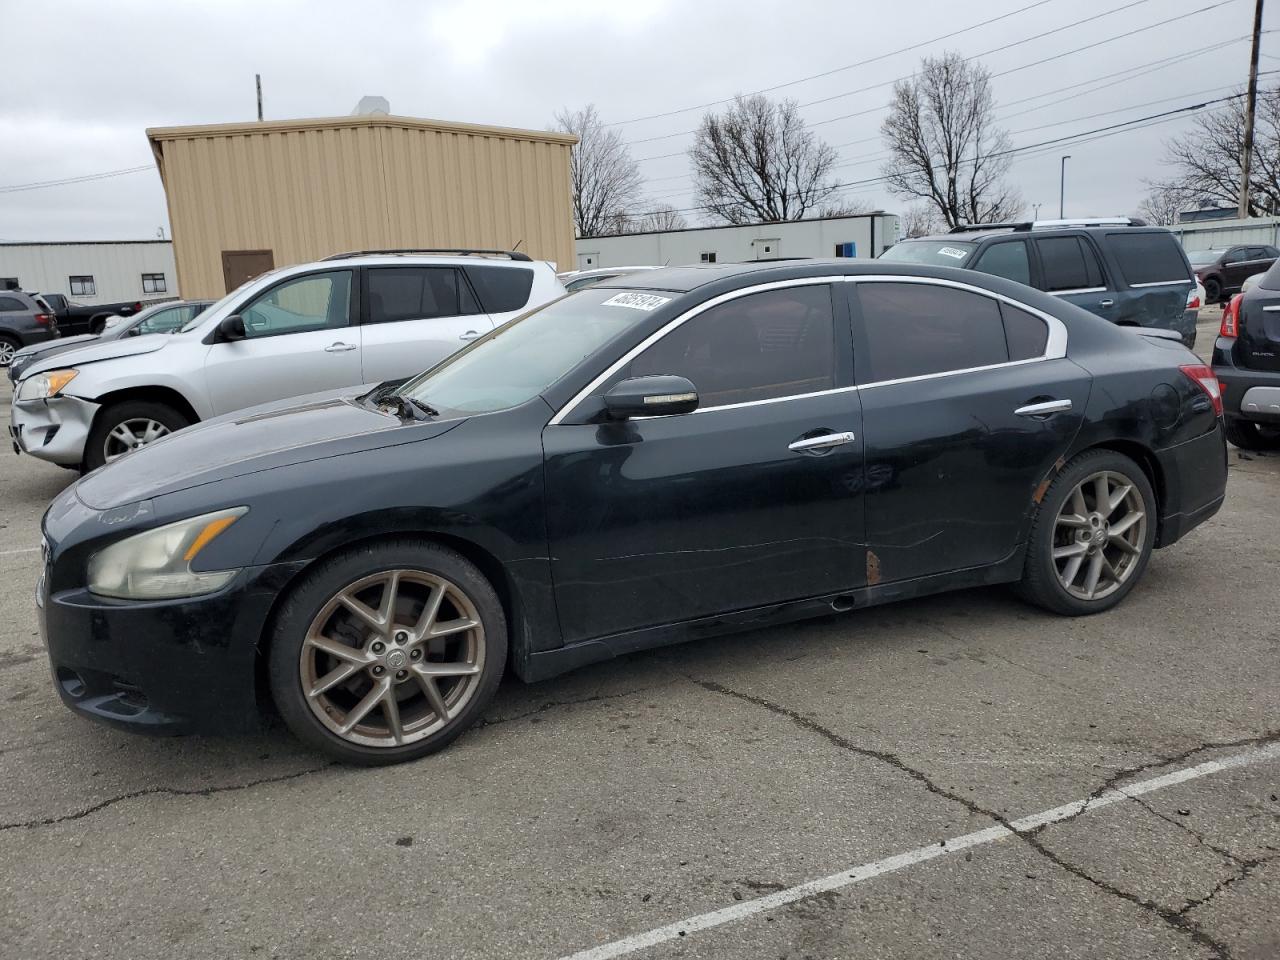 vin: 1N4AA5AP6BC858588 1N4AA5AP6BC858588 2011 nissan maxima 3500 for Sale in 45439 1950, Oh - Dayton, Moraine, USA